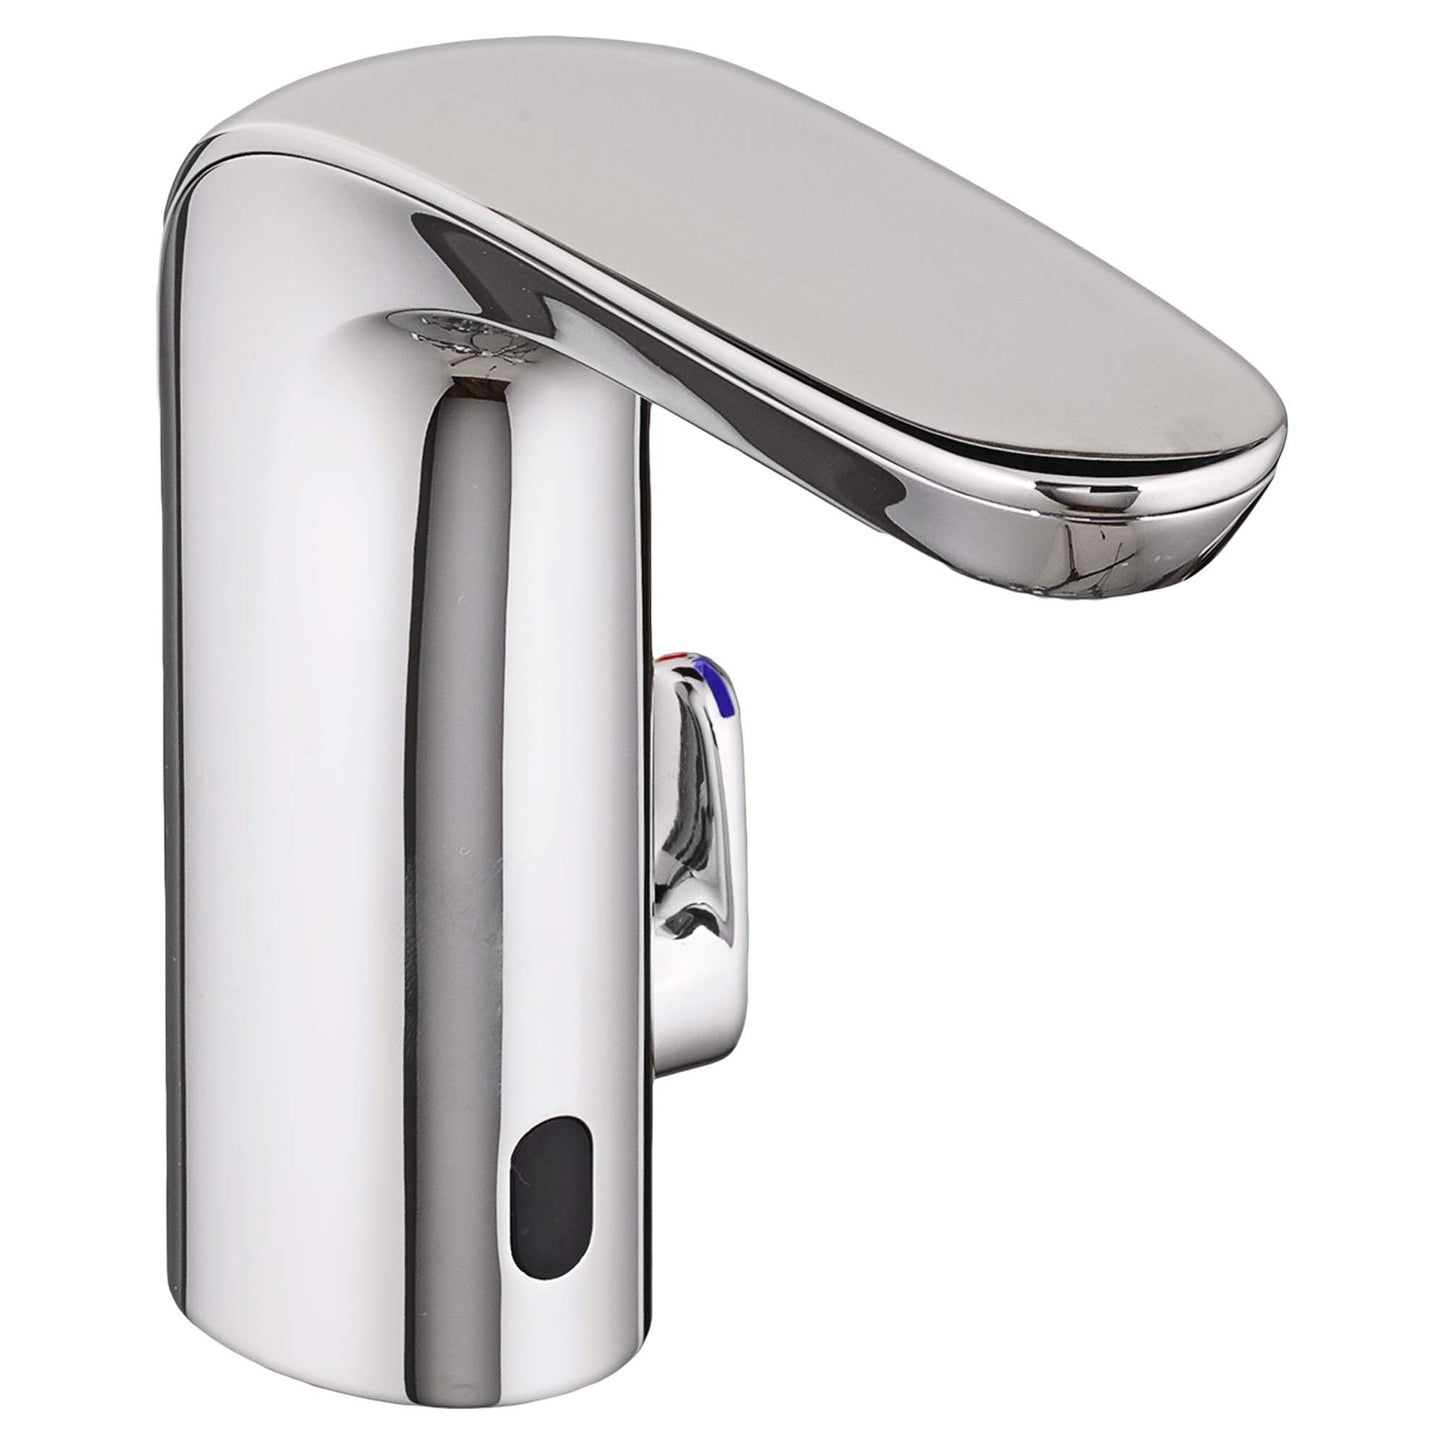 AMERICAN-STANDARD 7755315.002, NextGen Selectronic Touchless Faucet, Battery-Powered With SmarTherm Safety Shut-Off + ADM, 1.5 gpm/5.7 Lpm in Chrome